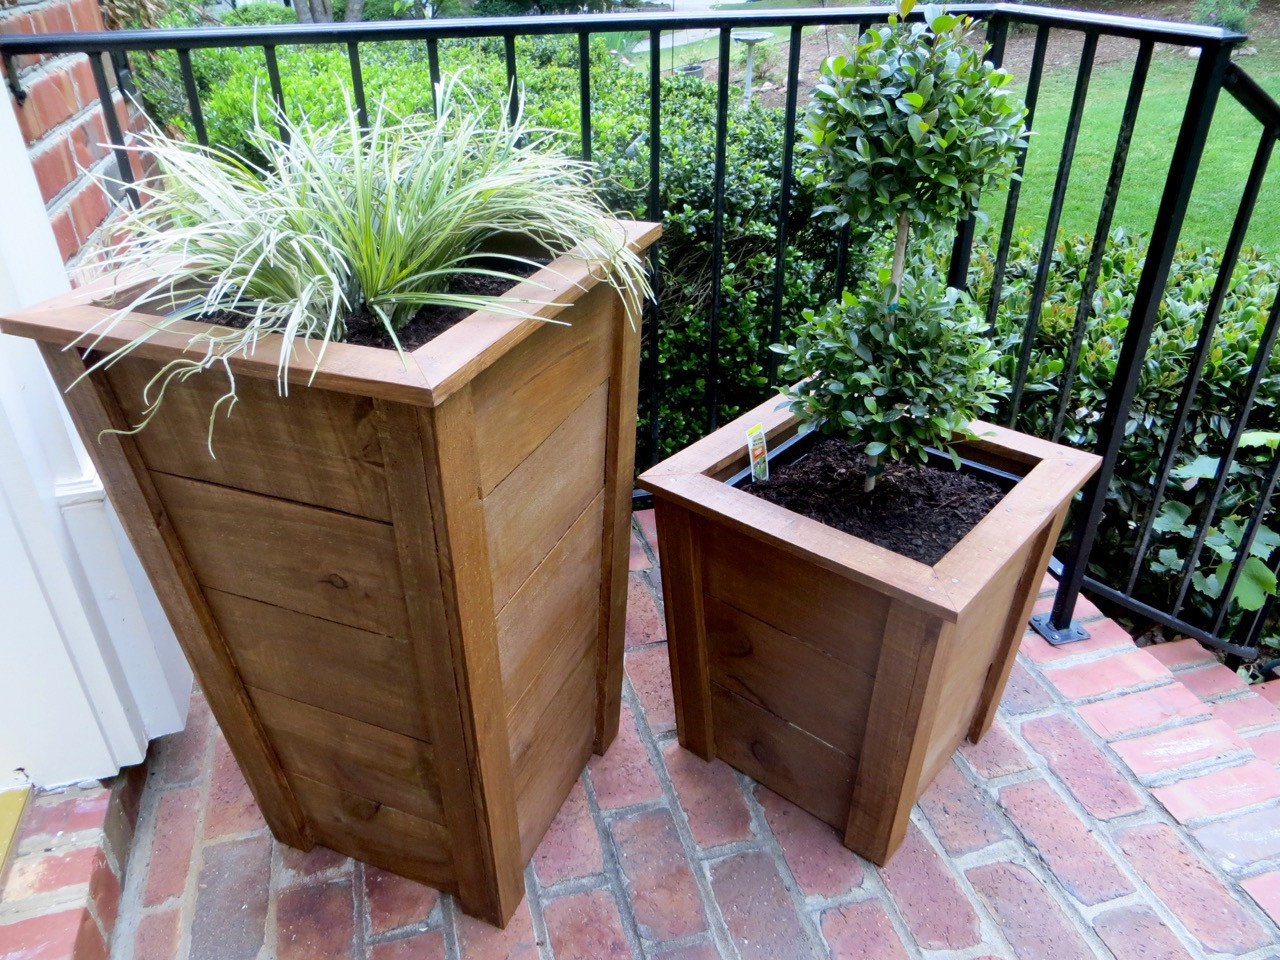 DIY Wooden Planter Boxes
 The Project Lady DIY Tutorial – Decorative Wood Planter